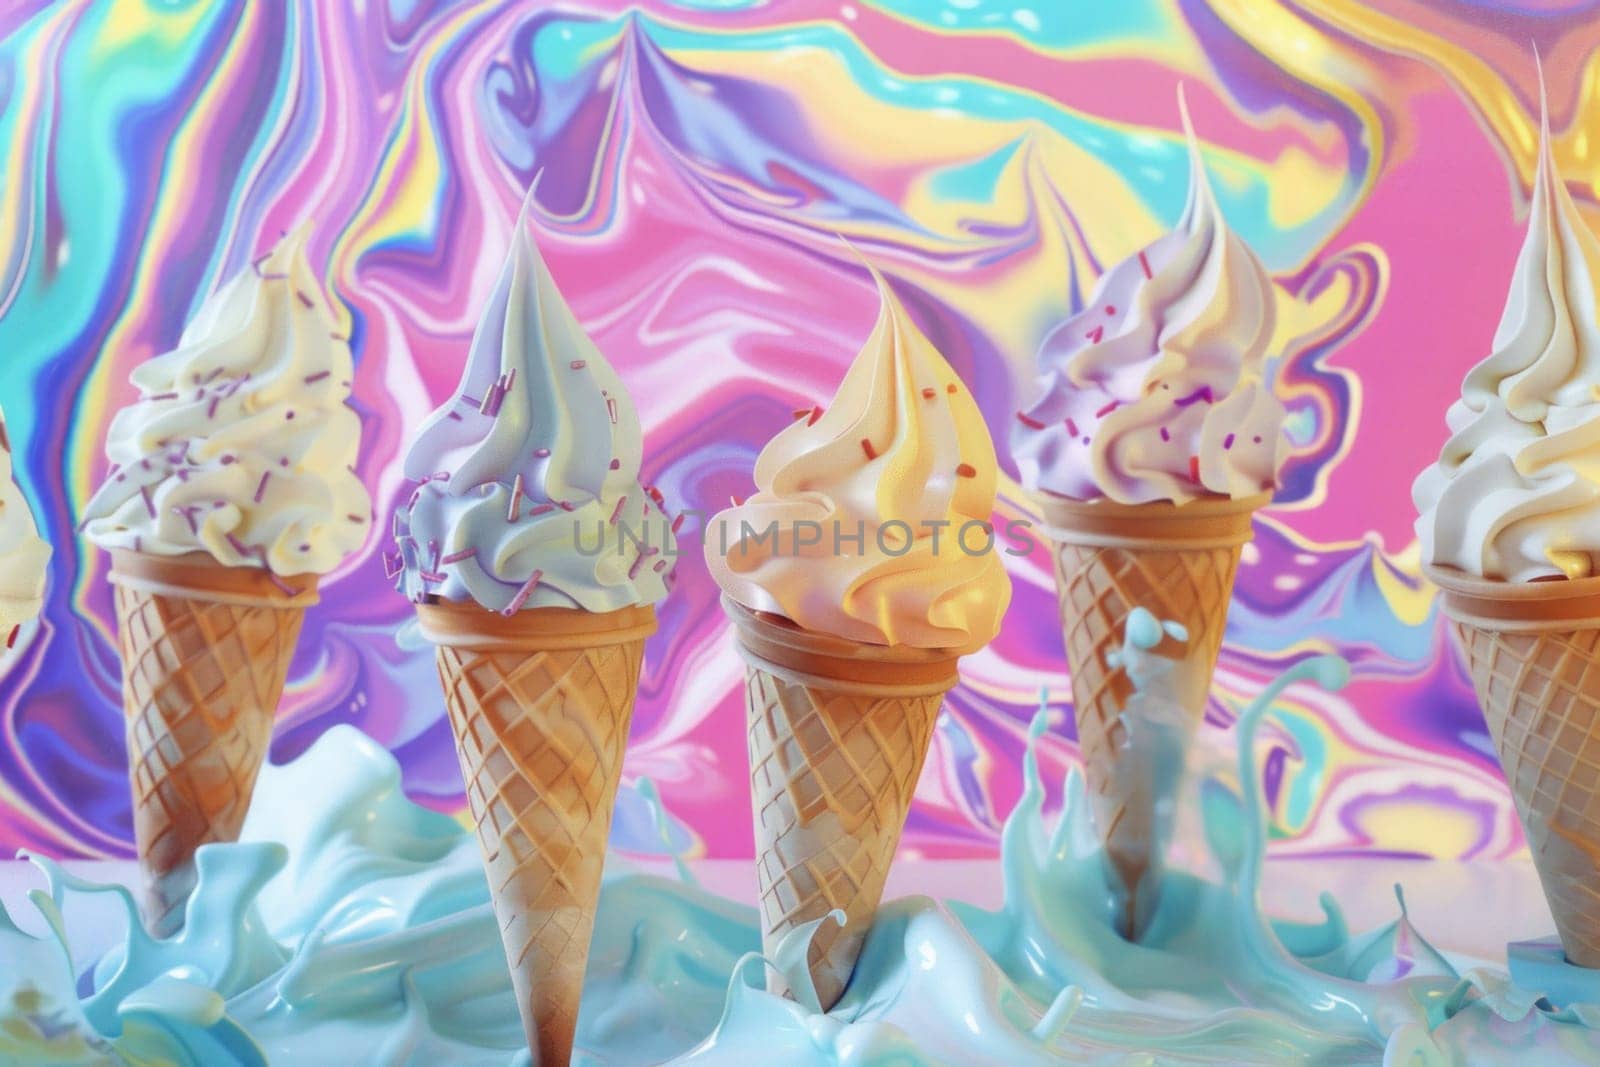 Colorful ice cream cones against rainbow swirl background for summer party celebration concept